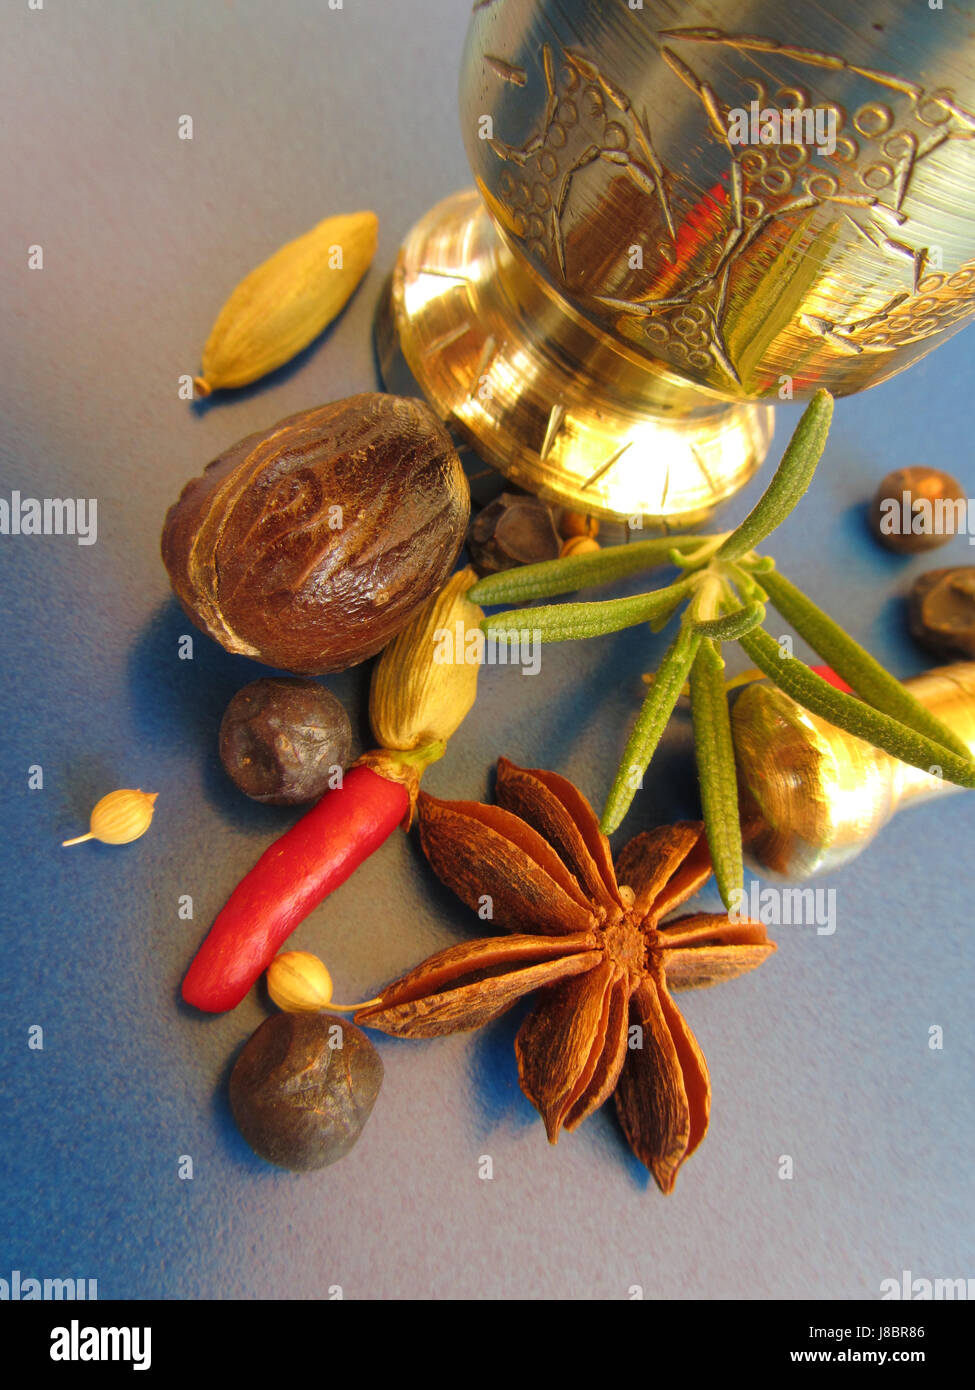 spice, flavour, grind, rub, rosemary, food, aliment, pepper, spice, condiment, Stock Photo